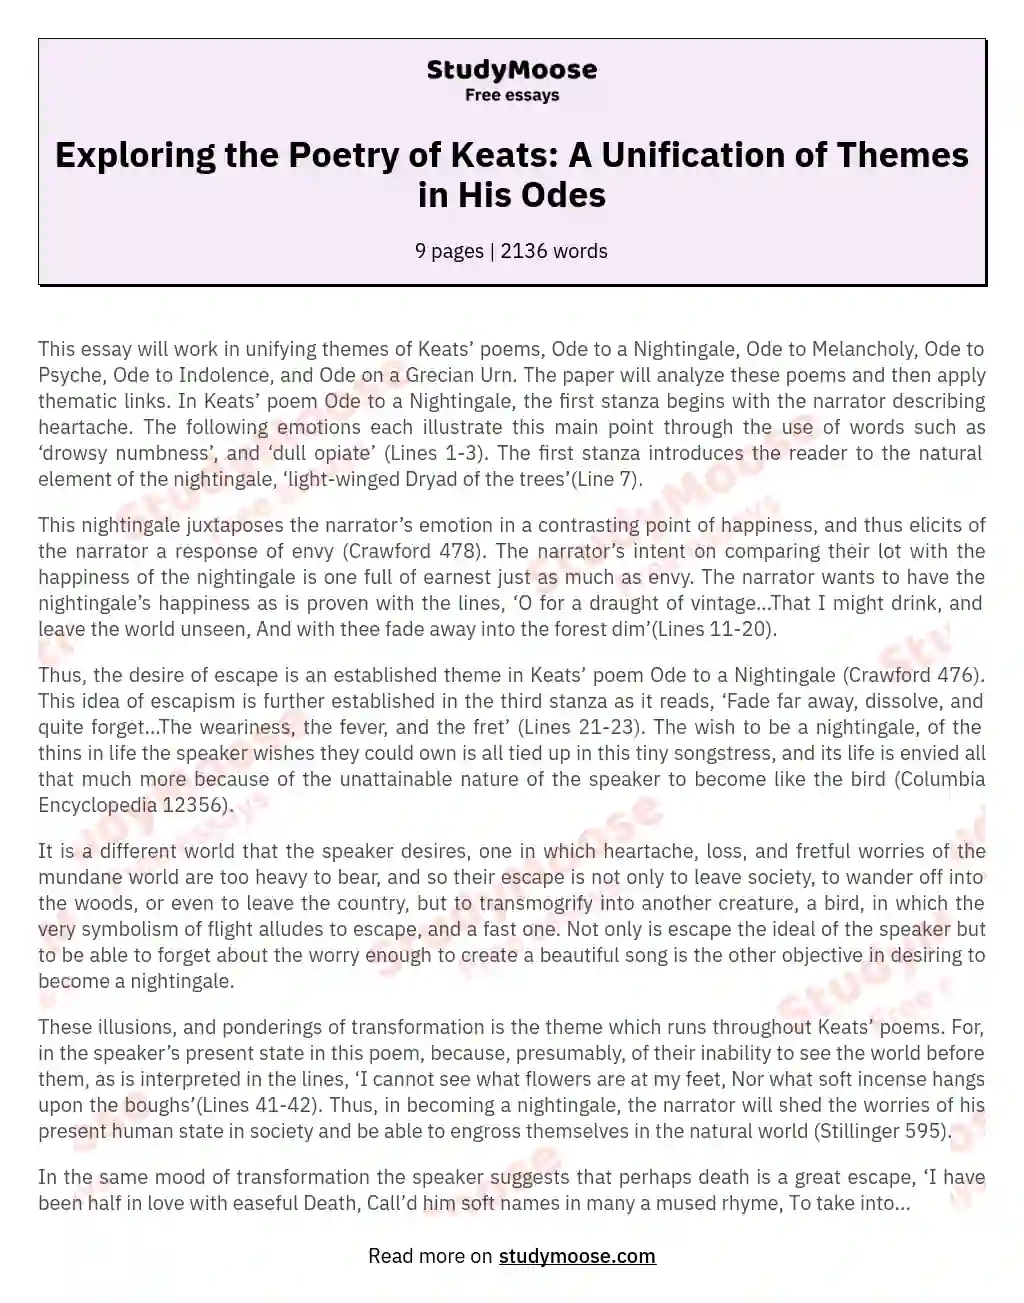 write an essay on keats as a writer of odes